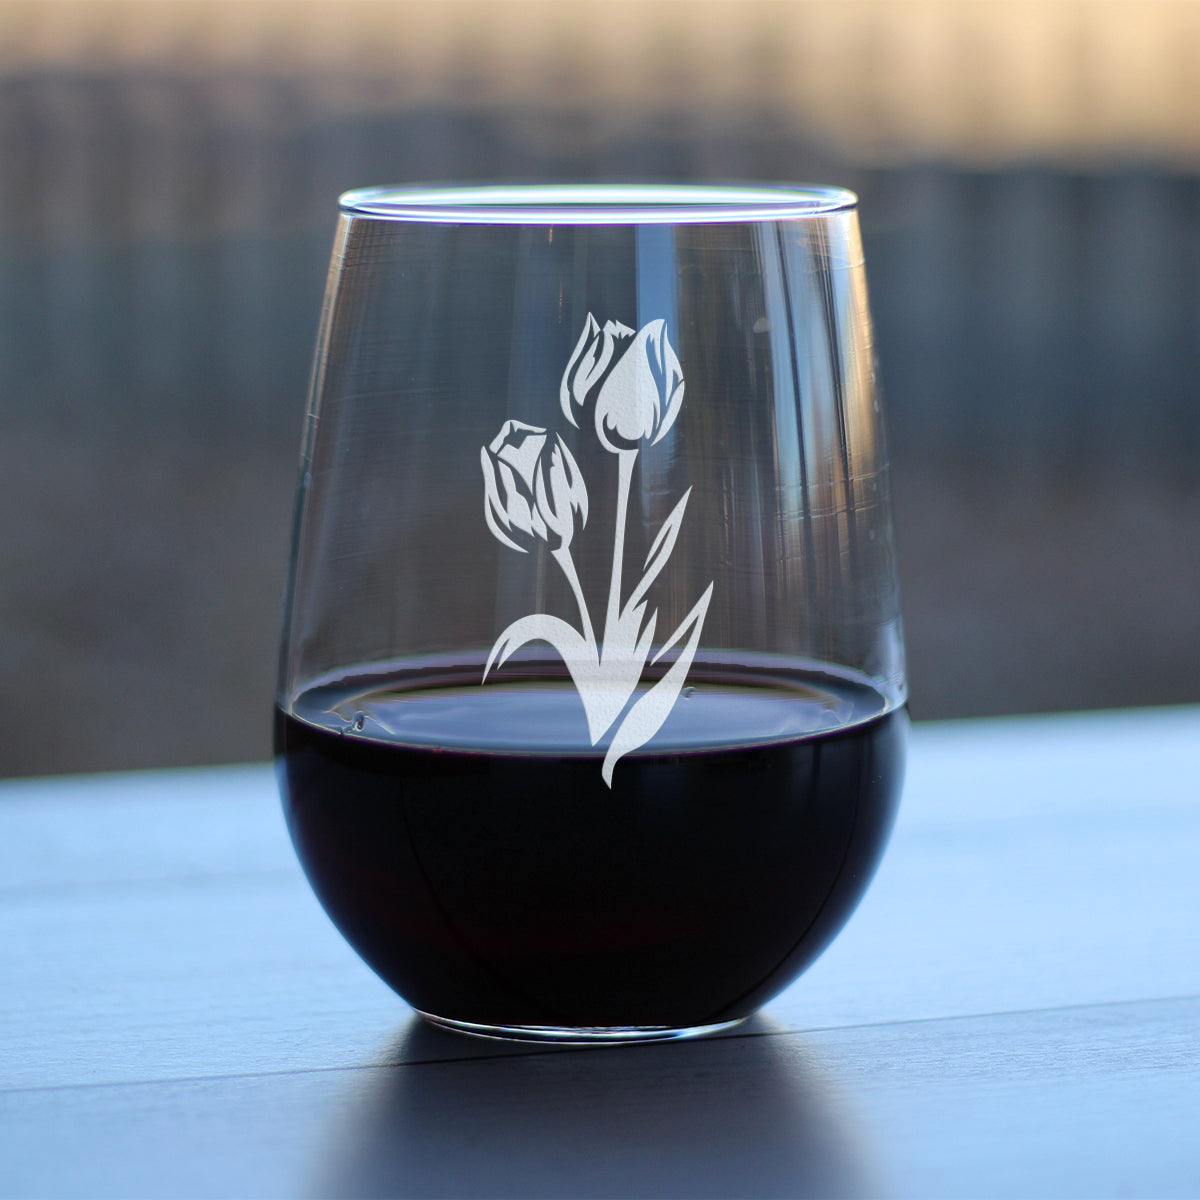 Tulip Stemless Wine Glass - Floral Themed Decor and Gifts for Flower Lovers - Large 17 Oz Glasses